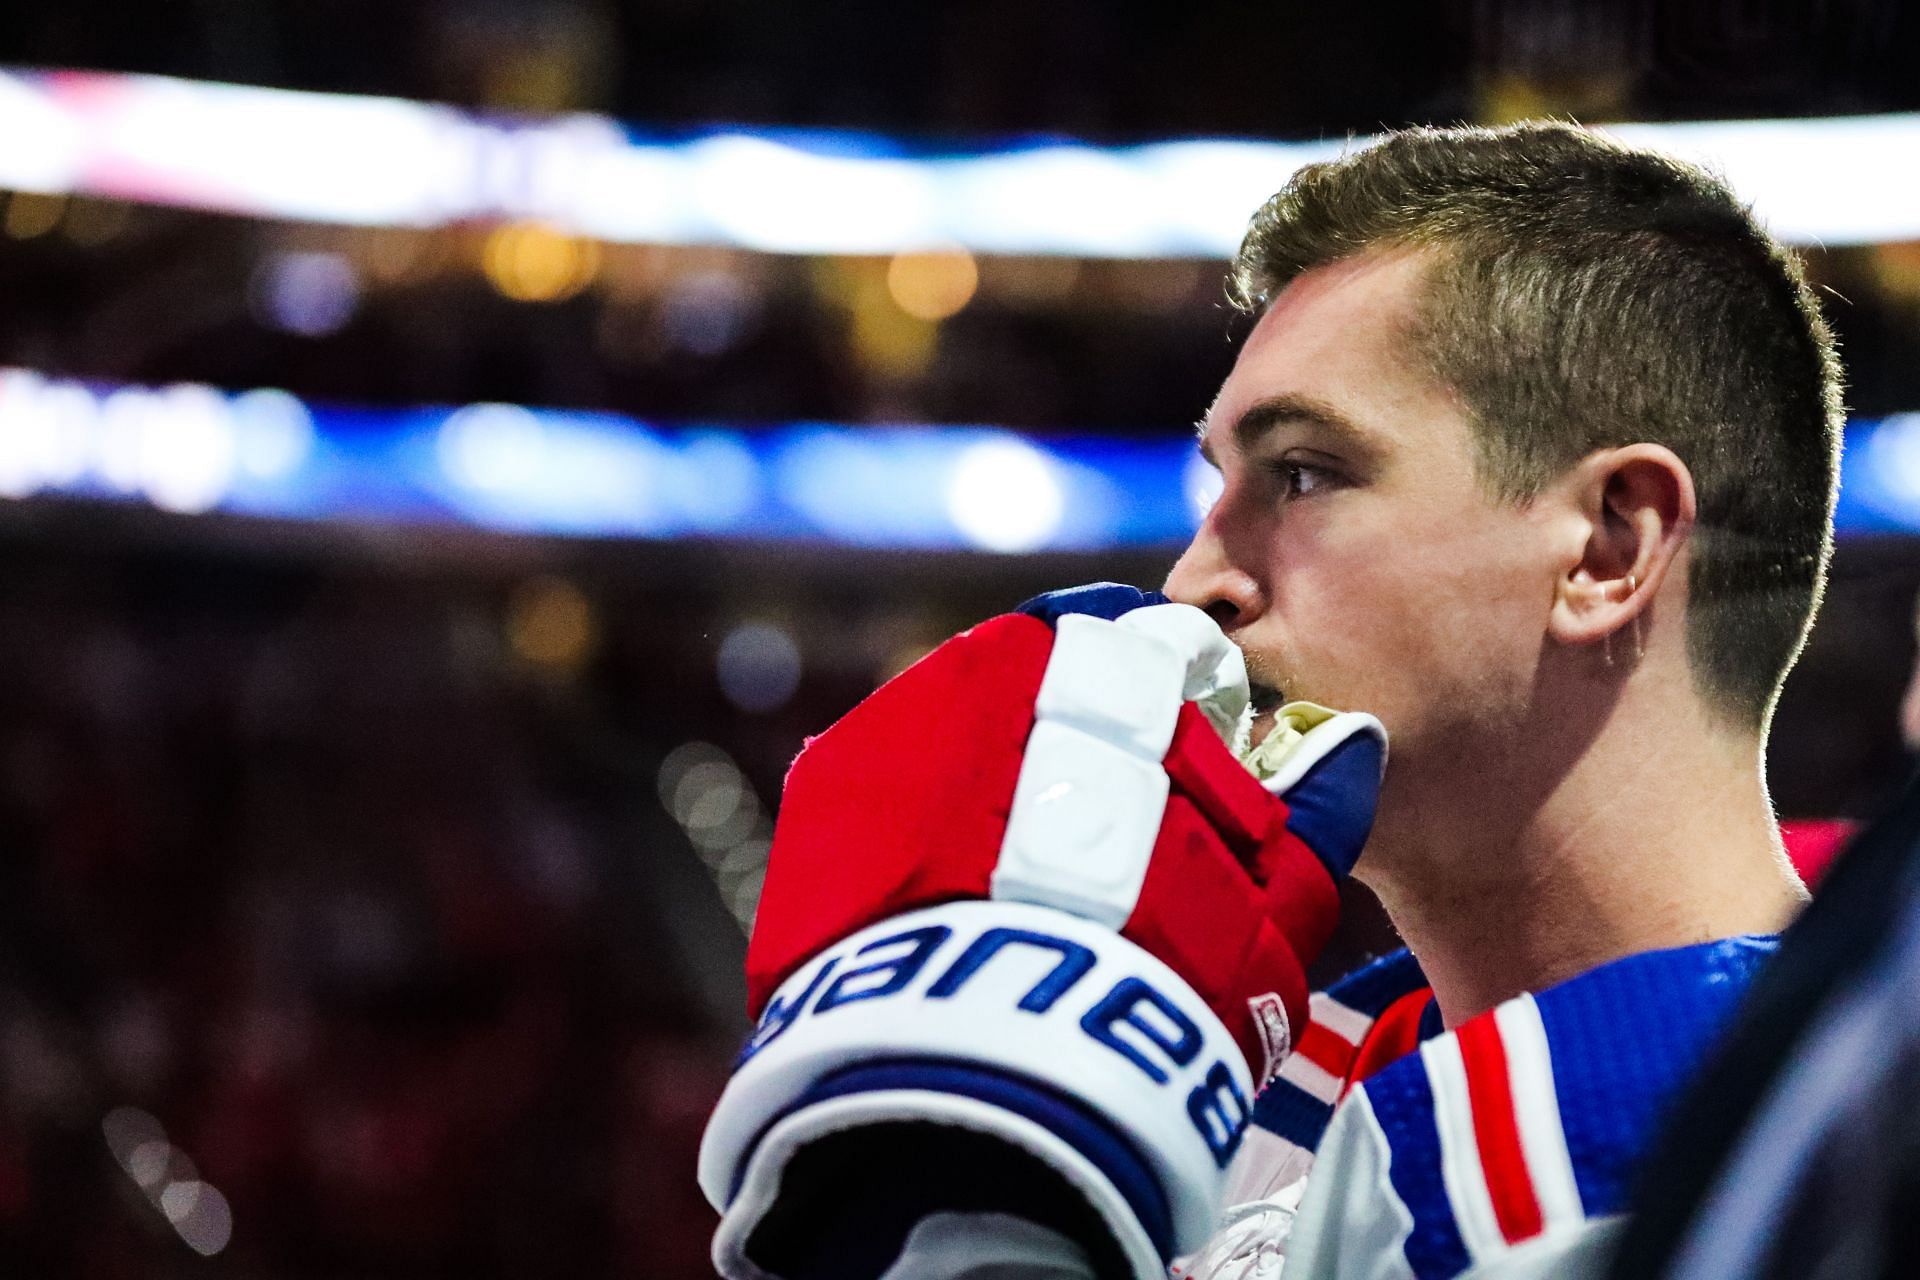 Patrick Kane: The Rangers' quick playoff elimination has an impact